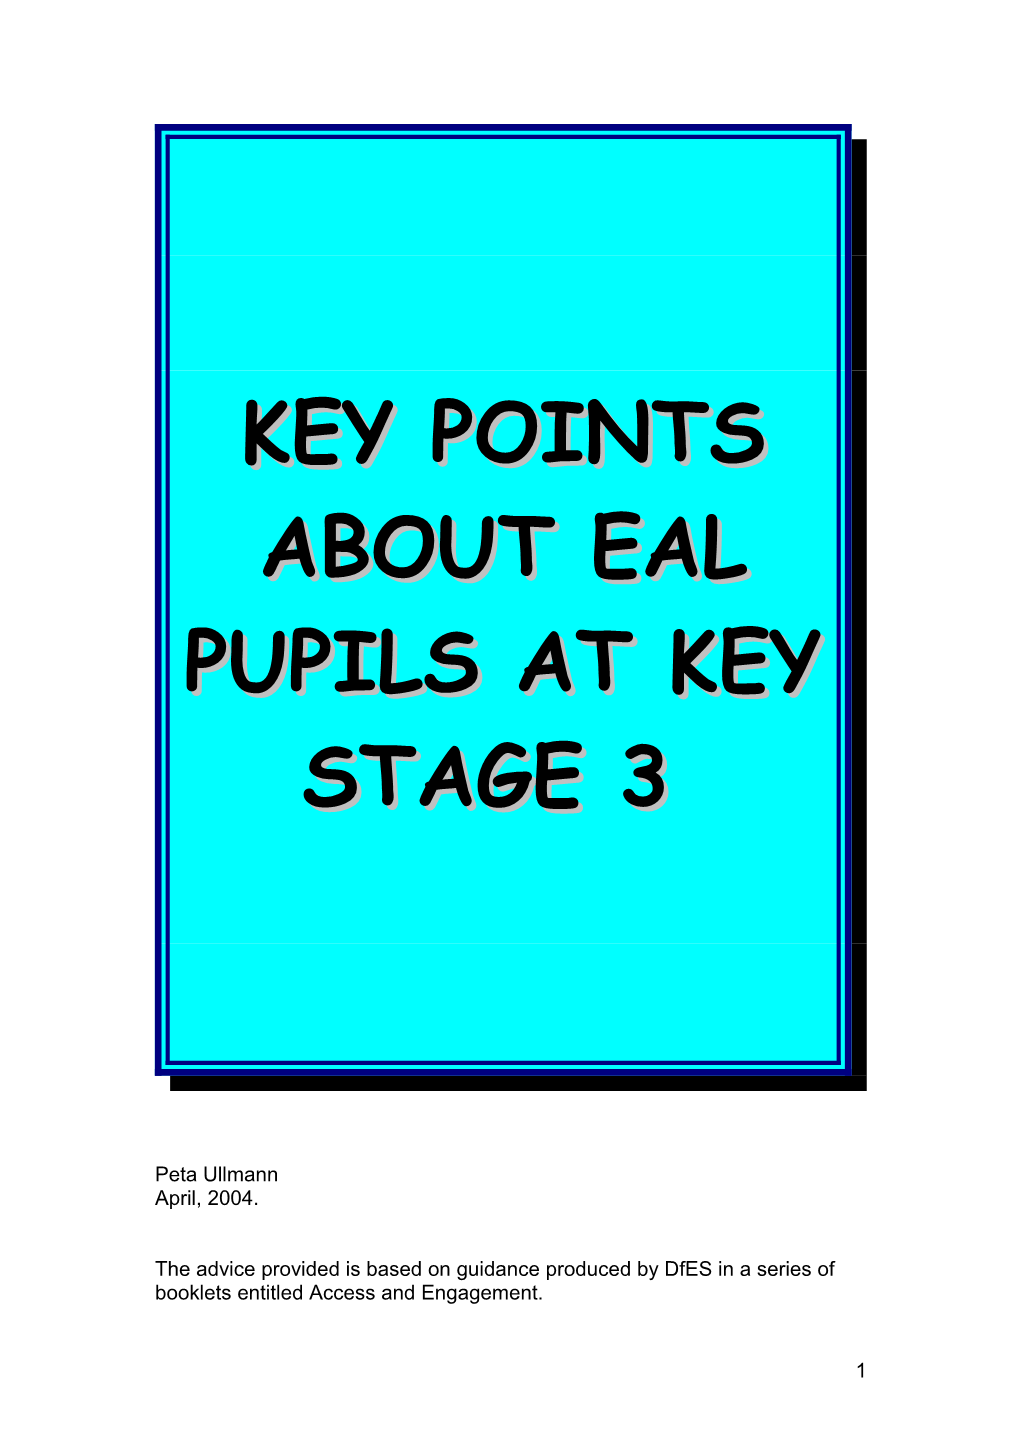 Key Points About EAL Pupils and Key Stage 3